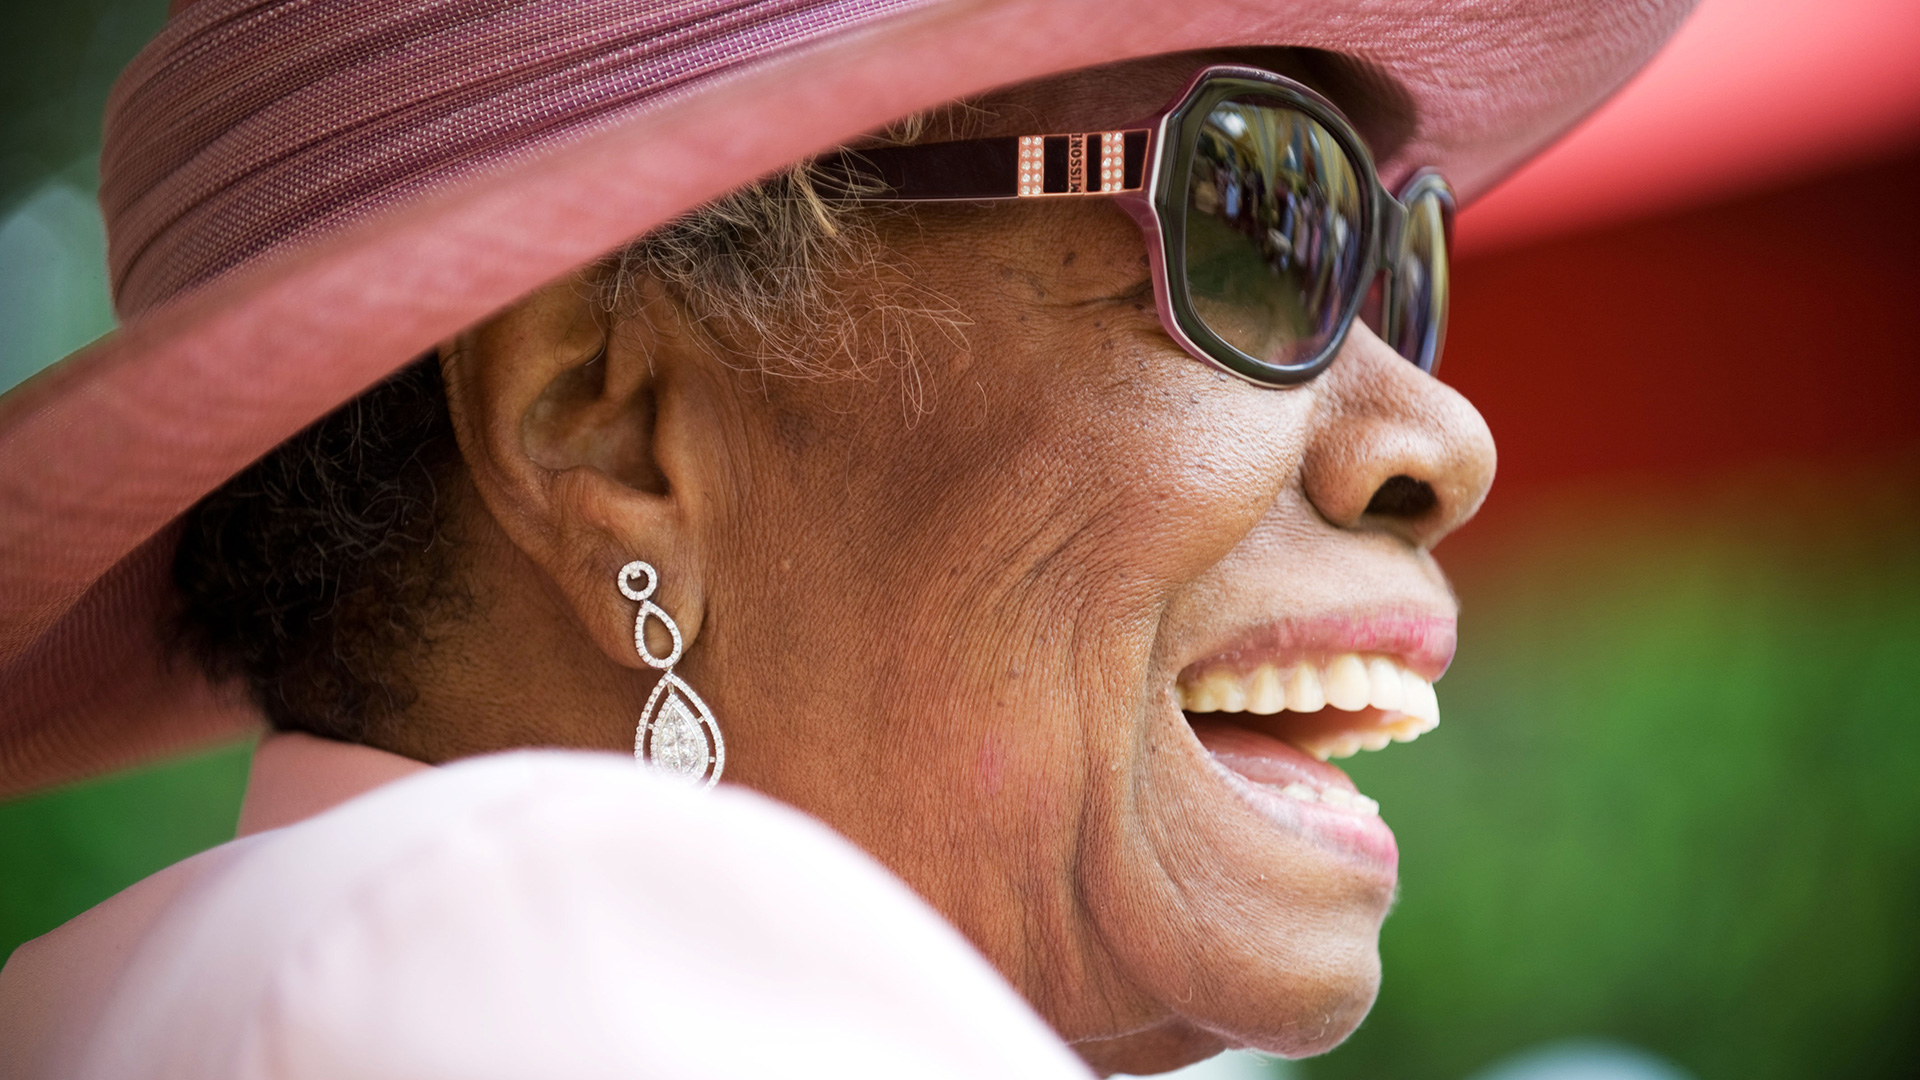 April 4, 1928: Maya Angelou Was Born and Became One of the Most Influential Voices of the 20th Century